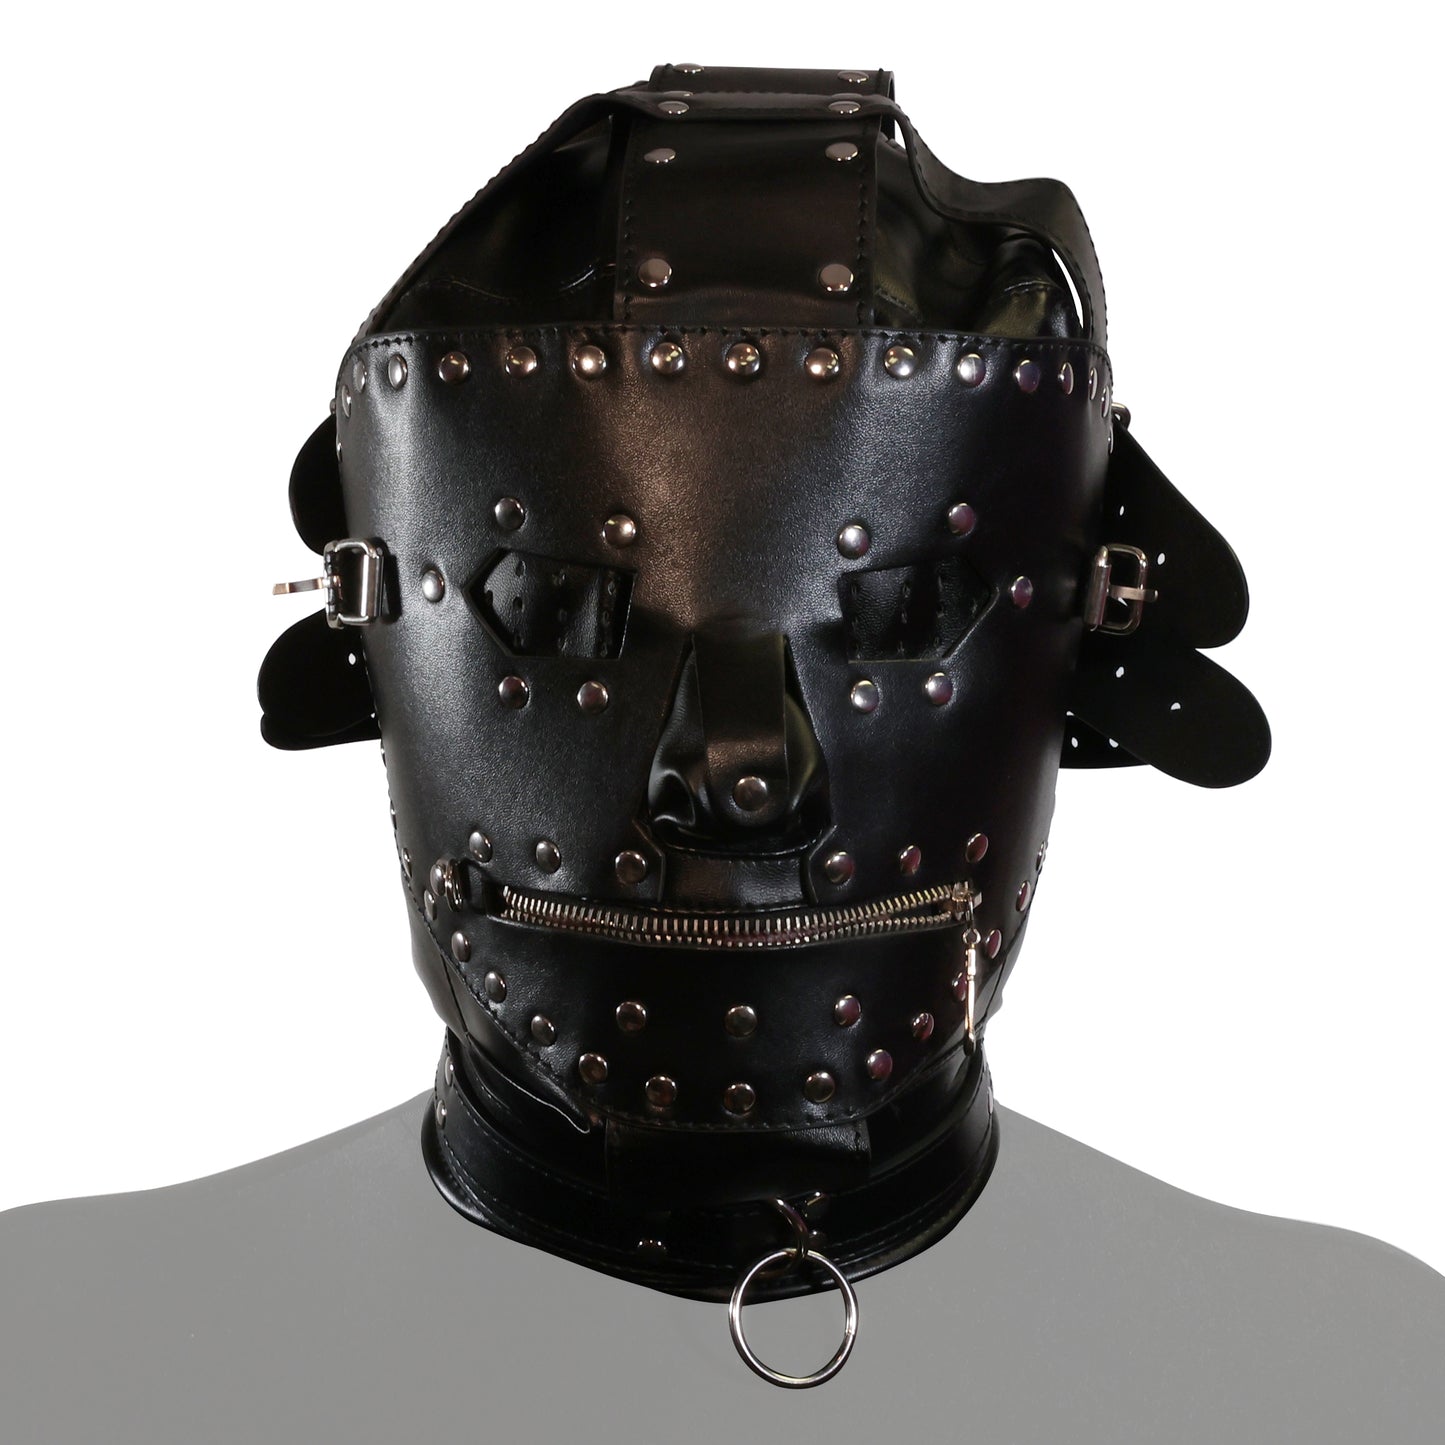 UNTAMED BLACK FAUX LEATHER METAL STUDDED DUNGEON MASK